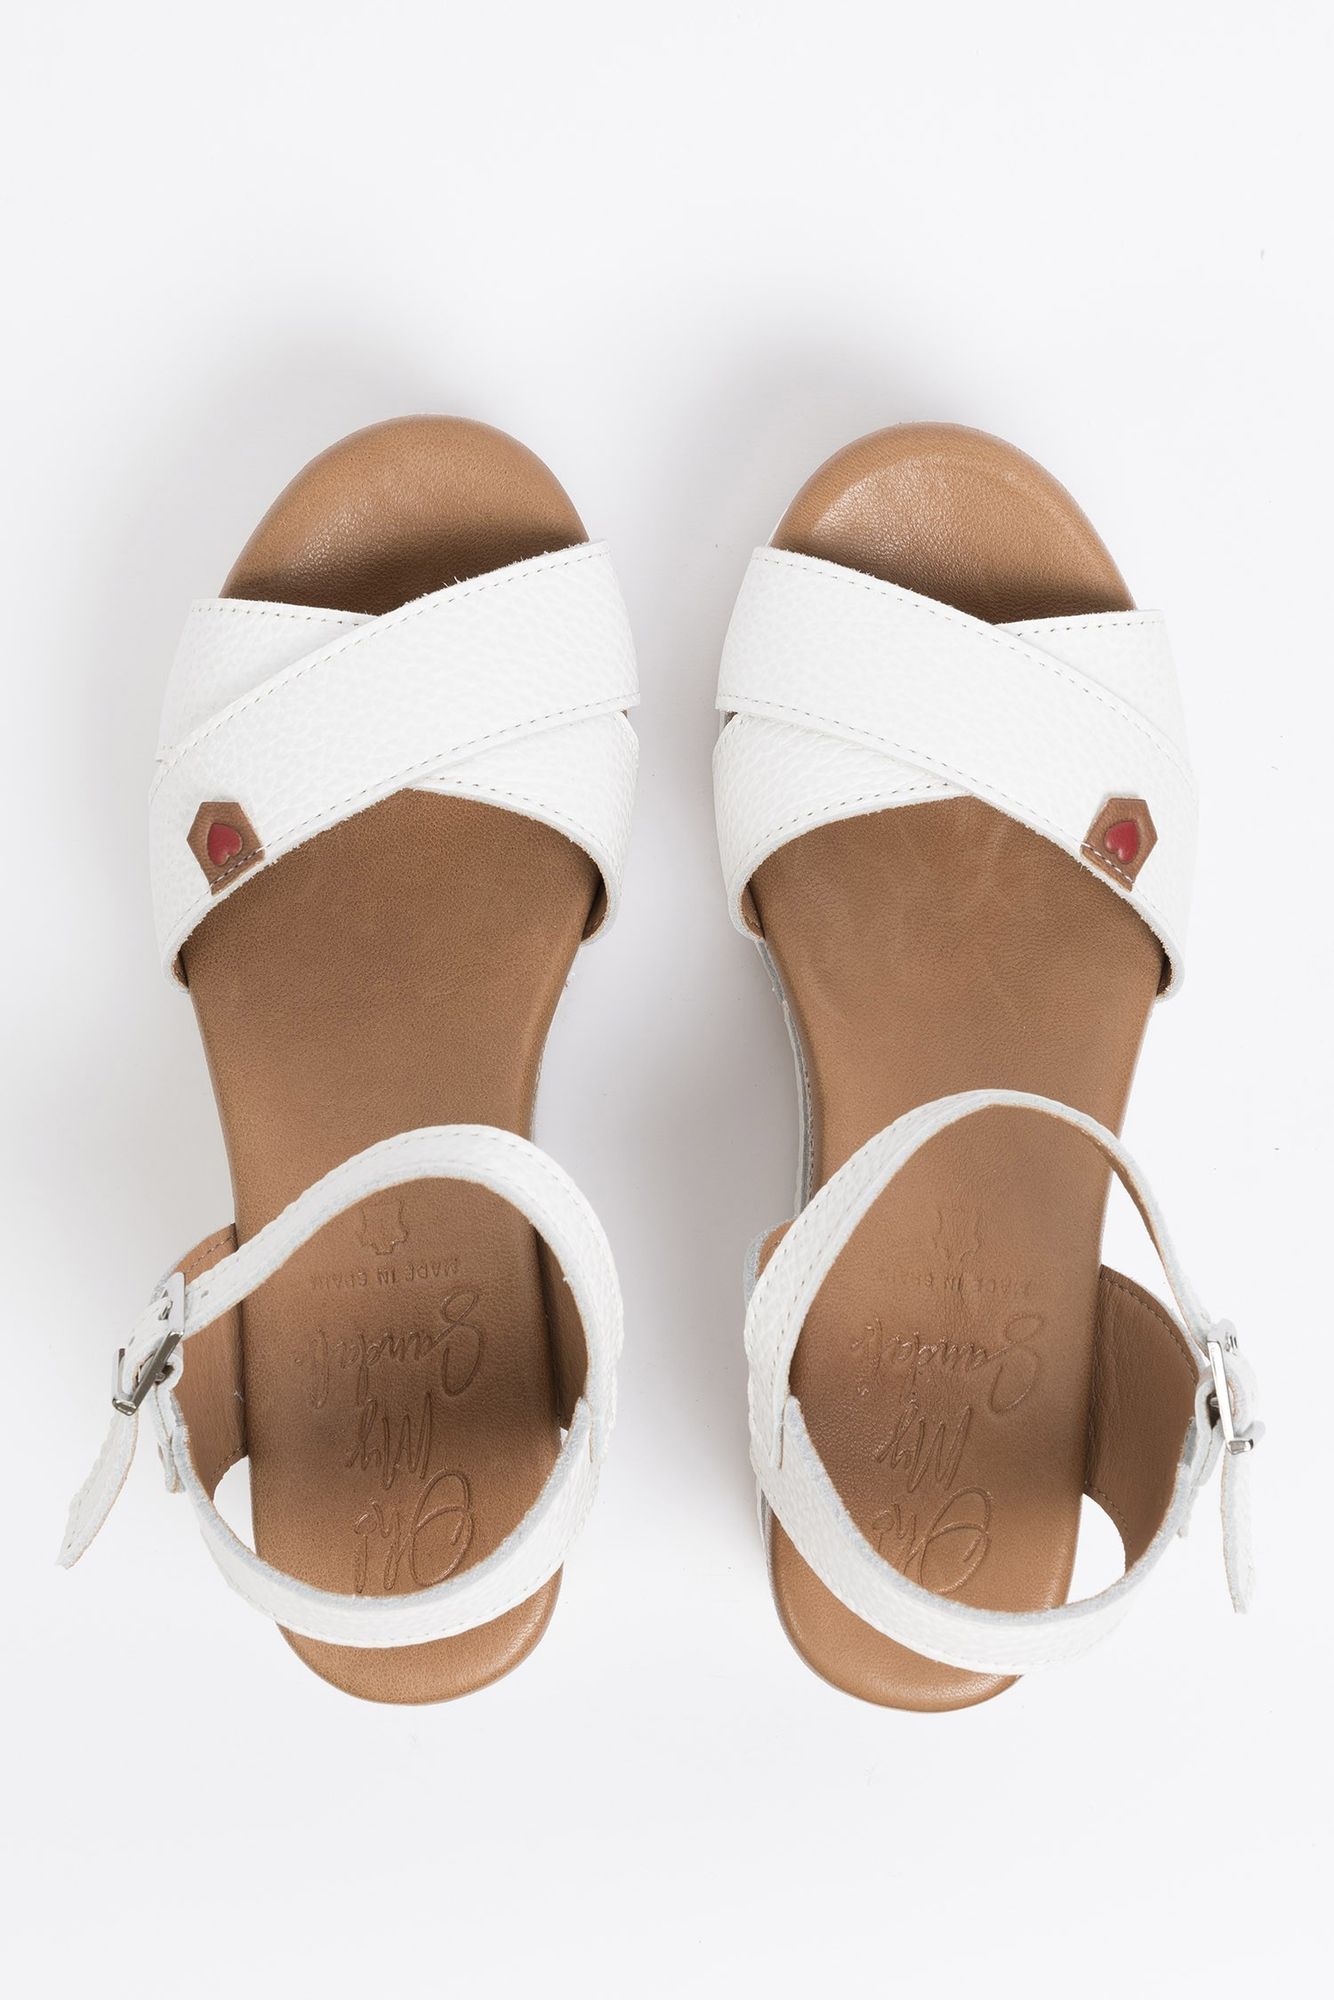 Oh my Sandals 5249 Blanco